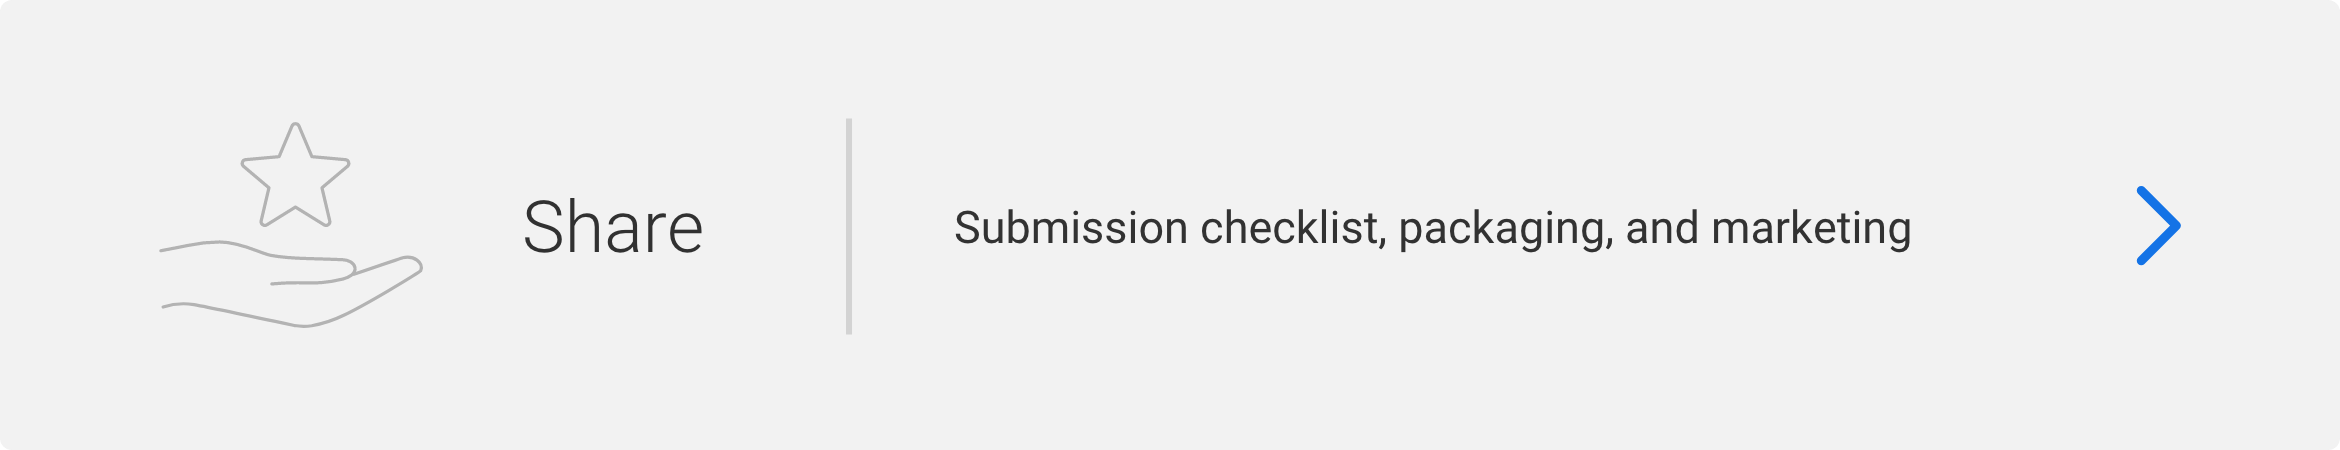 Share: Submission checklist, packaging, and marketing